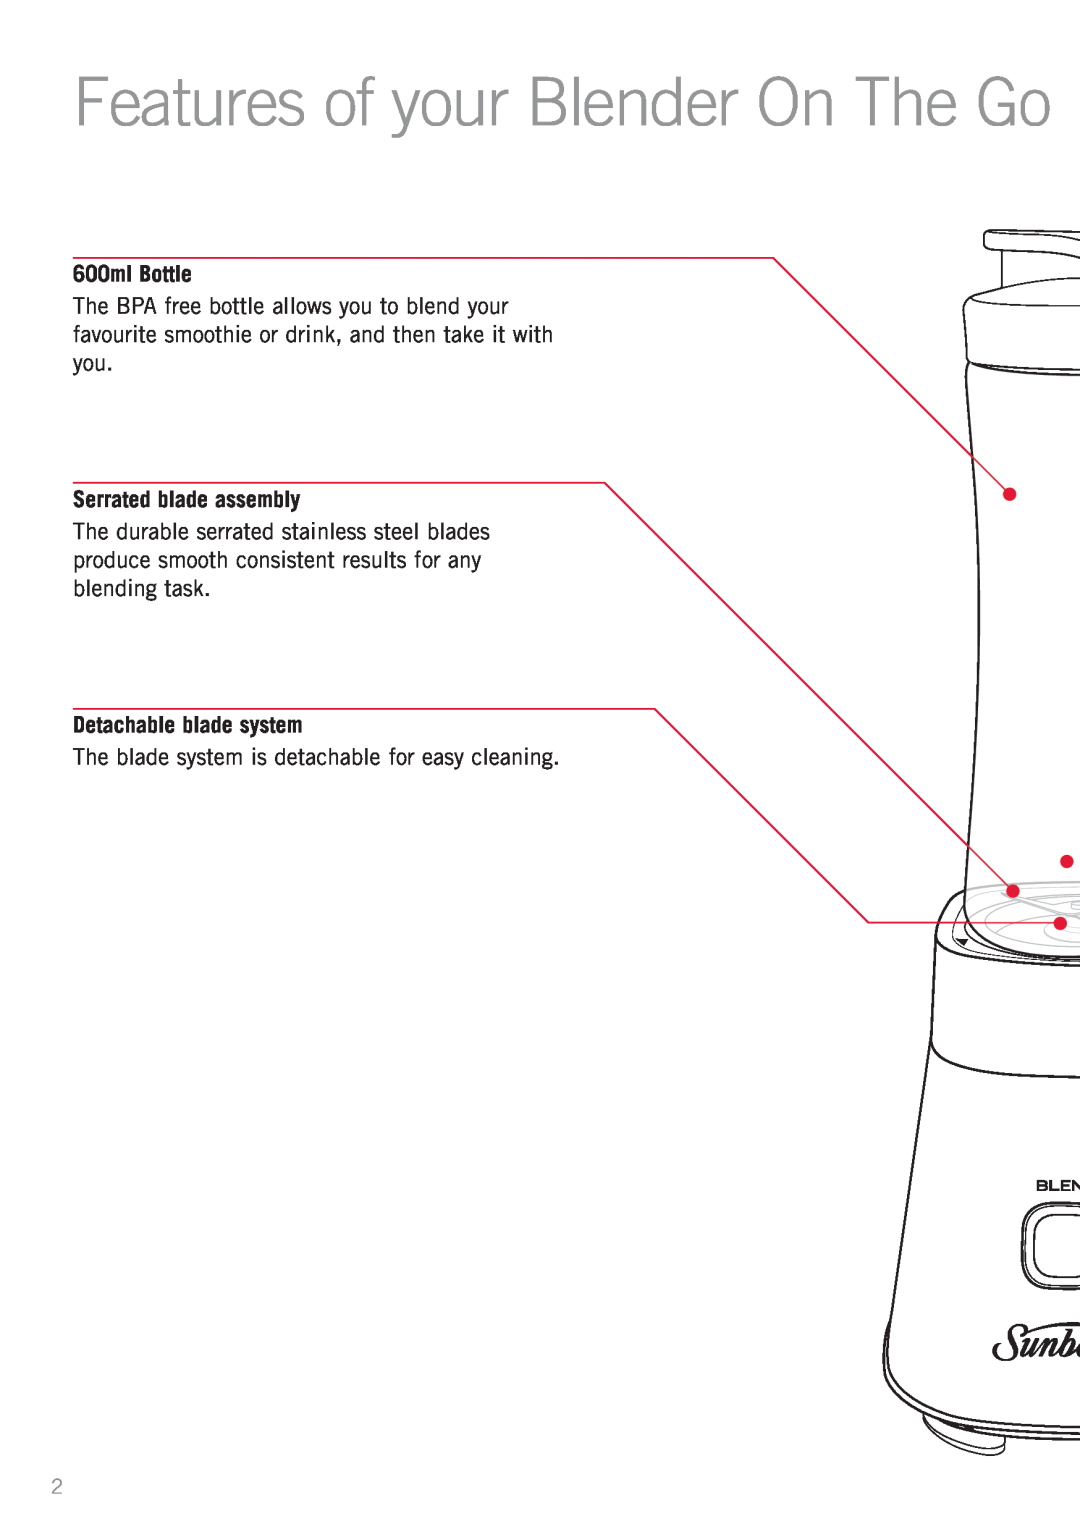 Sunbeam PB2000 manual Features of your Blender On The Go, 600ml Bottle, Serrated blade assembly, Detachable blade system 